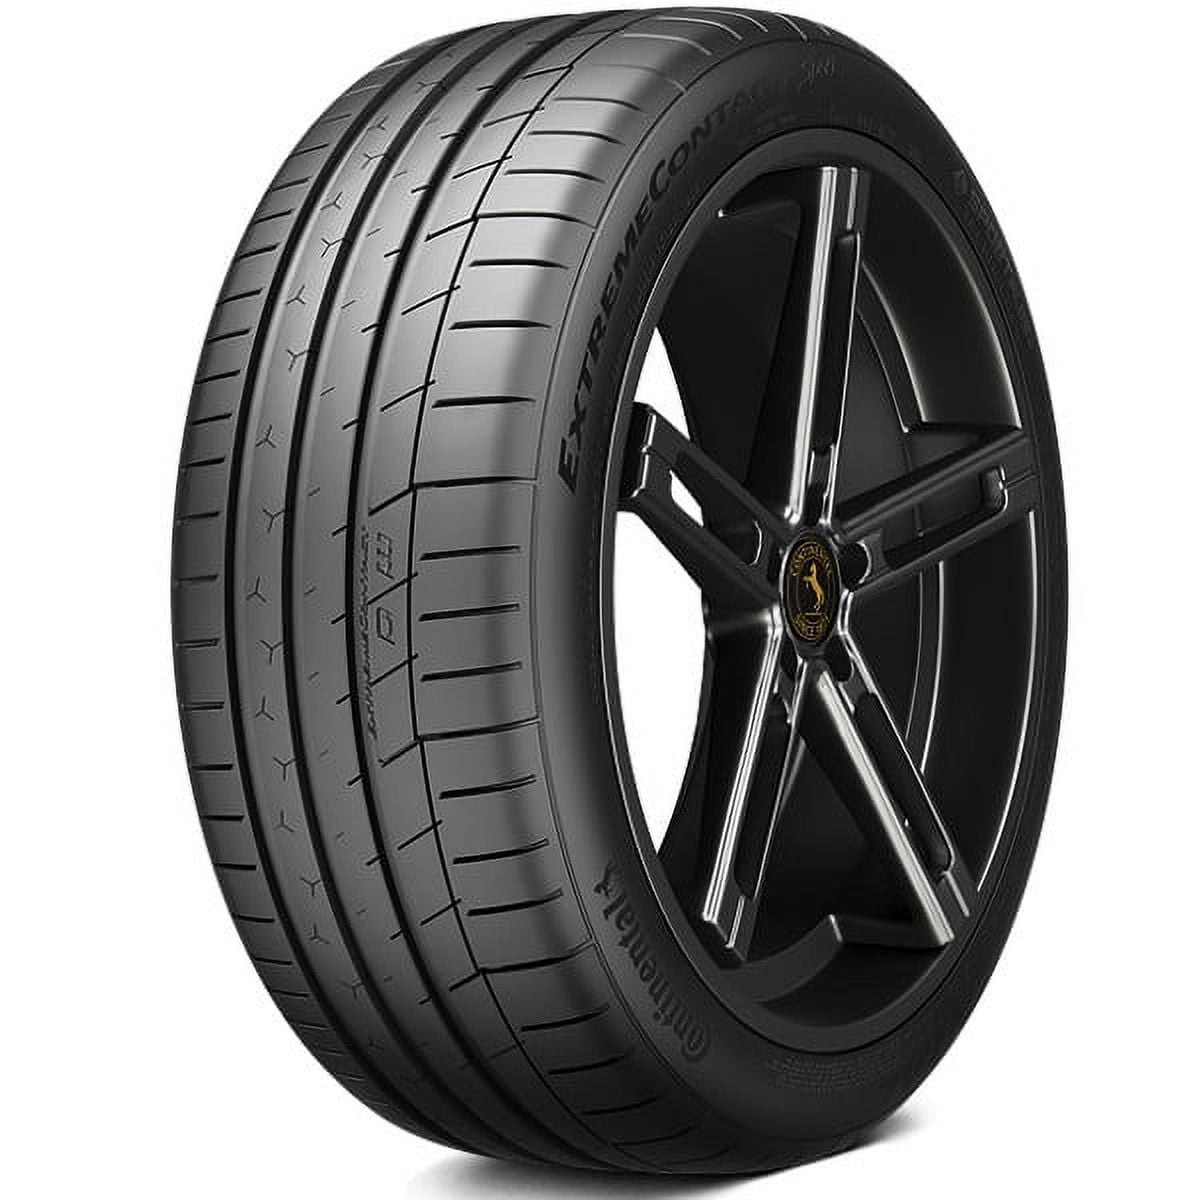 Continental ExtremeContact Sport 245/45ZR17 95Y Max Performance Summer Tire